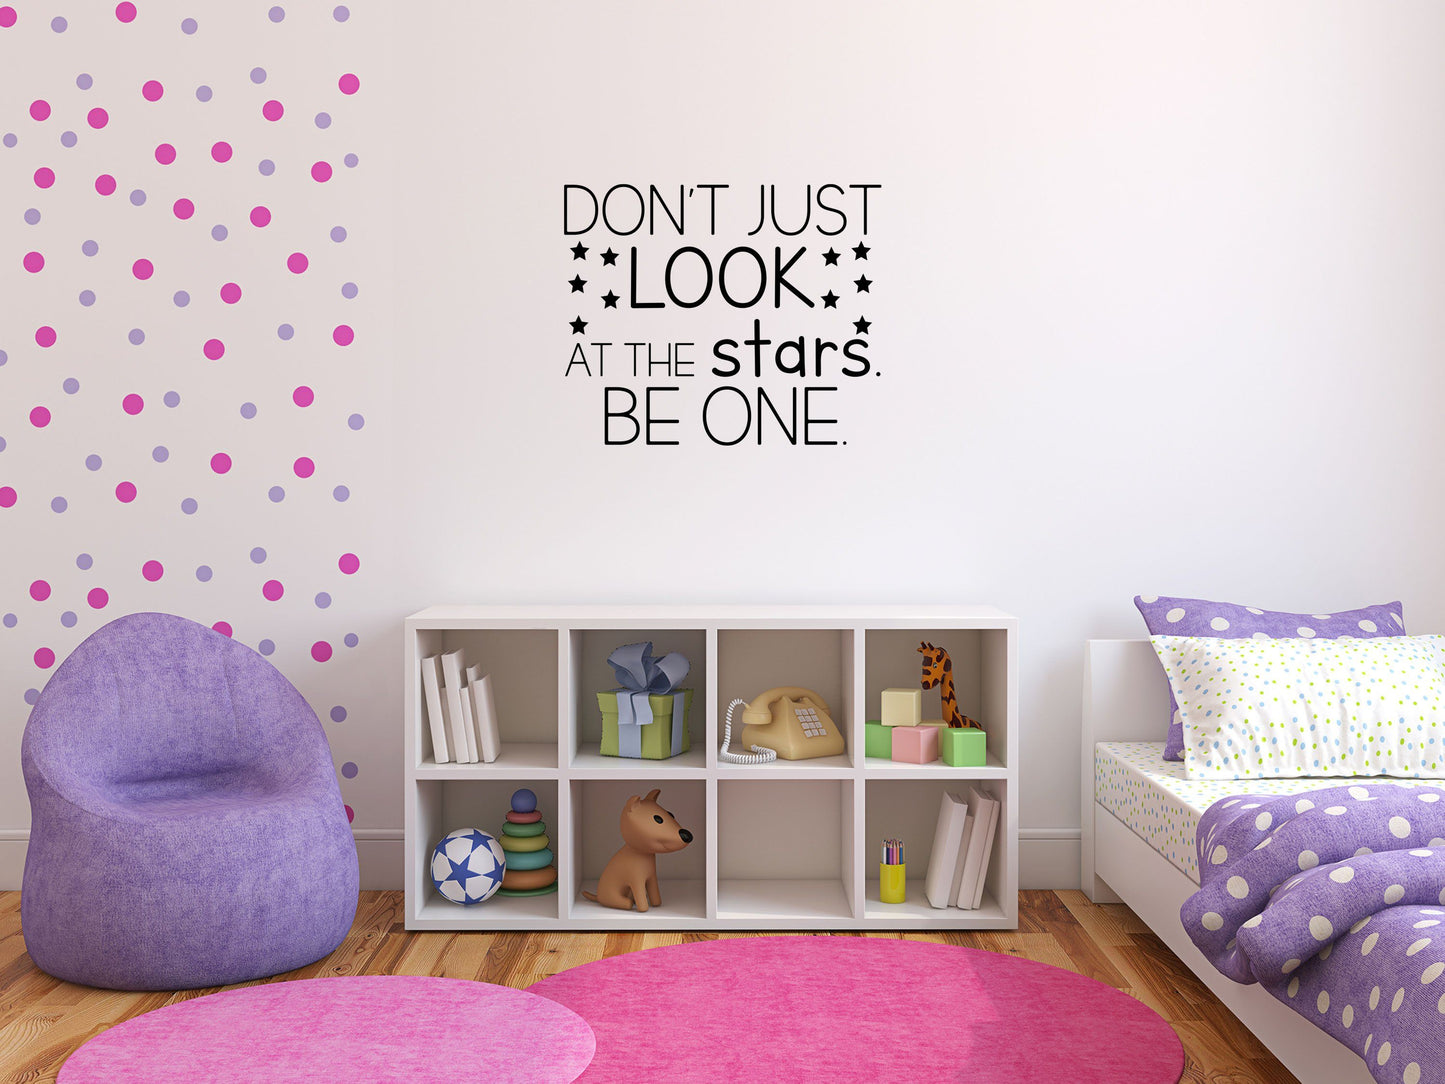 Be A Star Decal - Be A Star Decor - Star Wall Decal - Don't Just Look At The Stars Decor - Stars Wall Art Vinyl Wall Decal Inspirational Wall Signs 